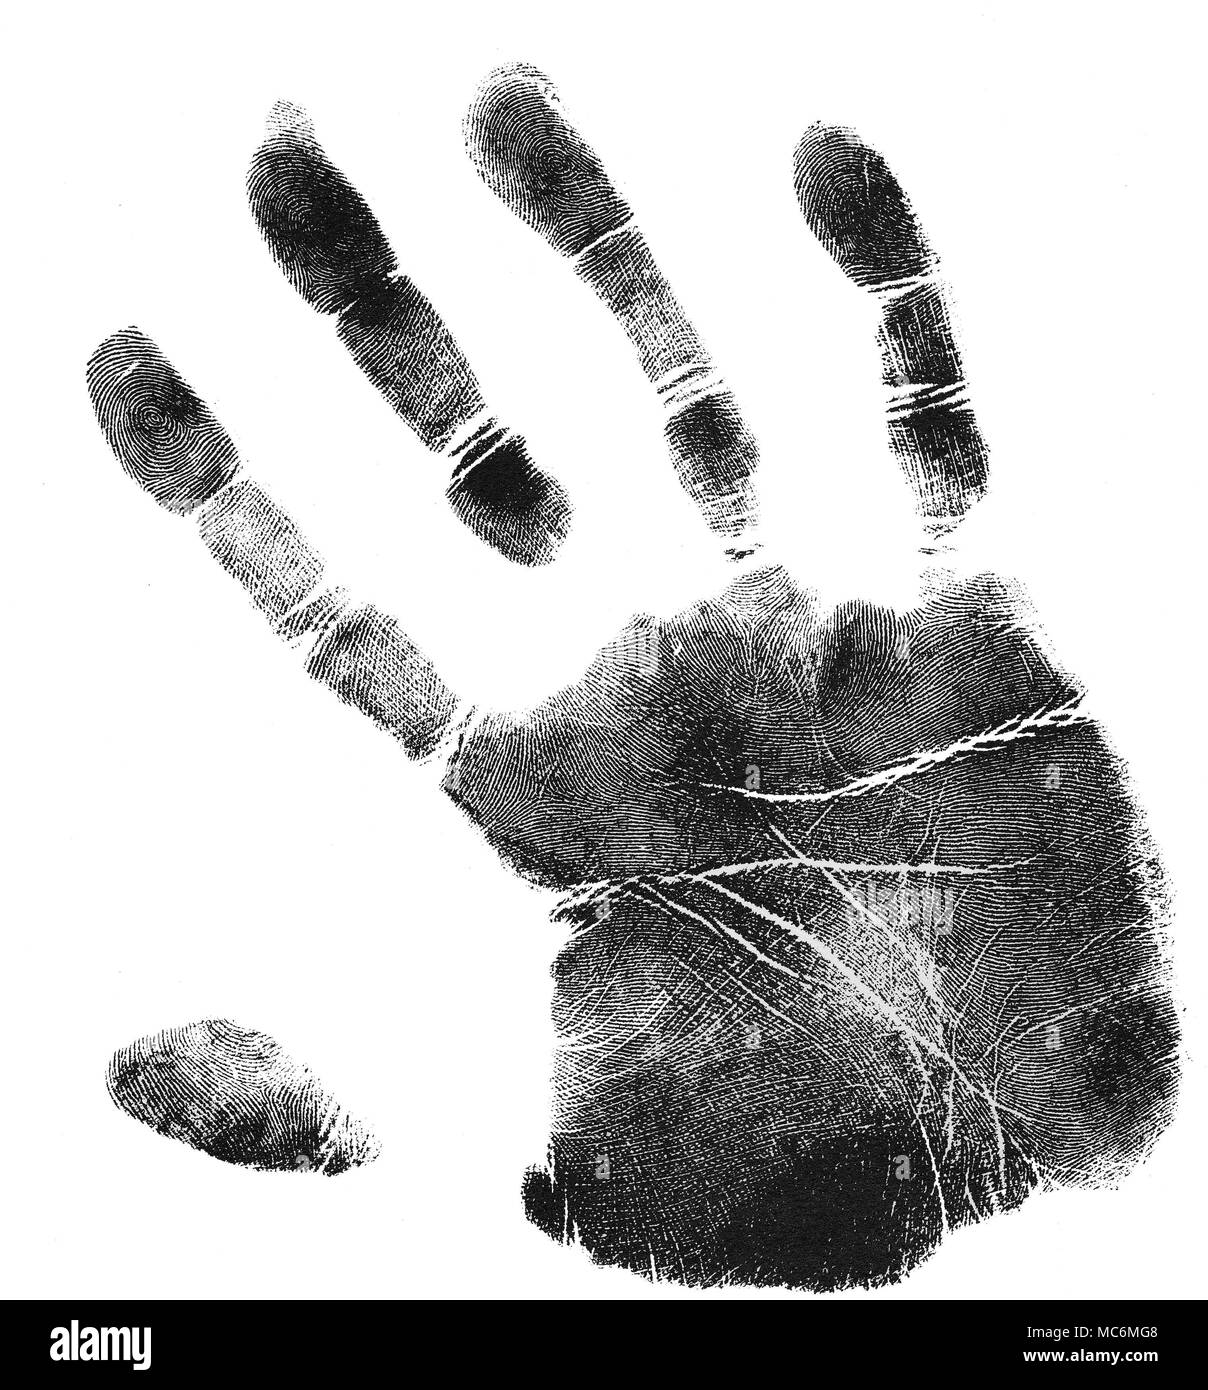 PALMISTRY - CHIROGNOMY A print of the Air hand. The hand type has a square palm and long fingers. There is a distinctive 'plumpness' about the hand, which is fleshy, and usually quite elegant. The lines are energetic, and rich in formation. Stock Photo